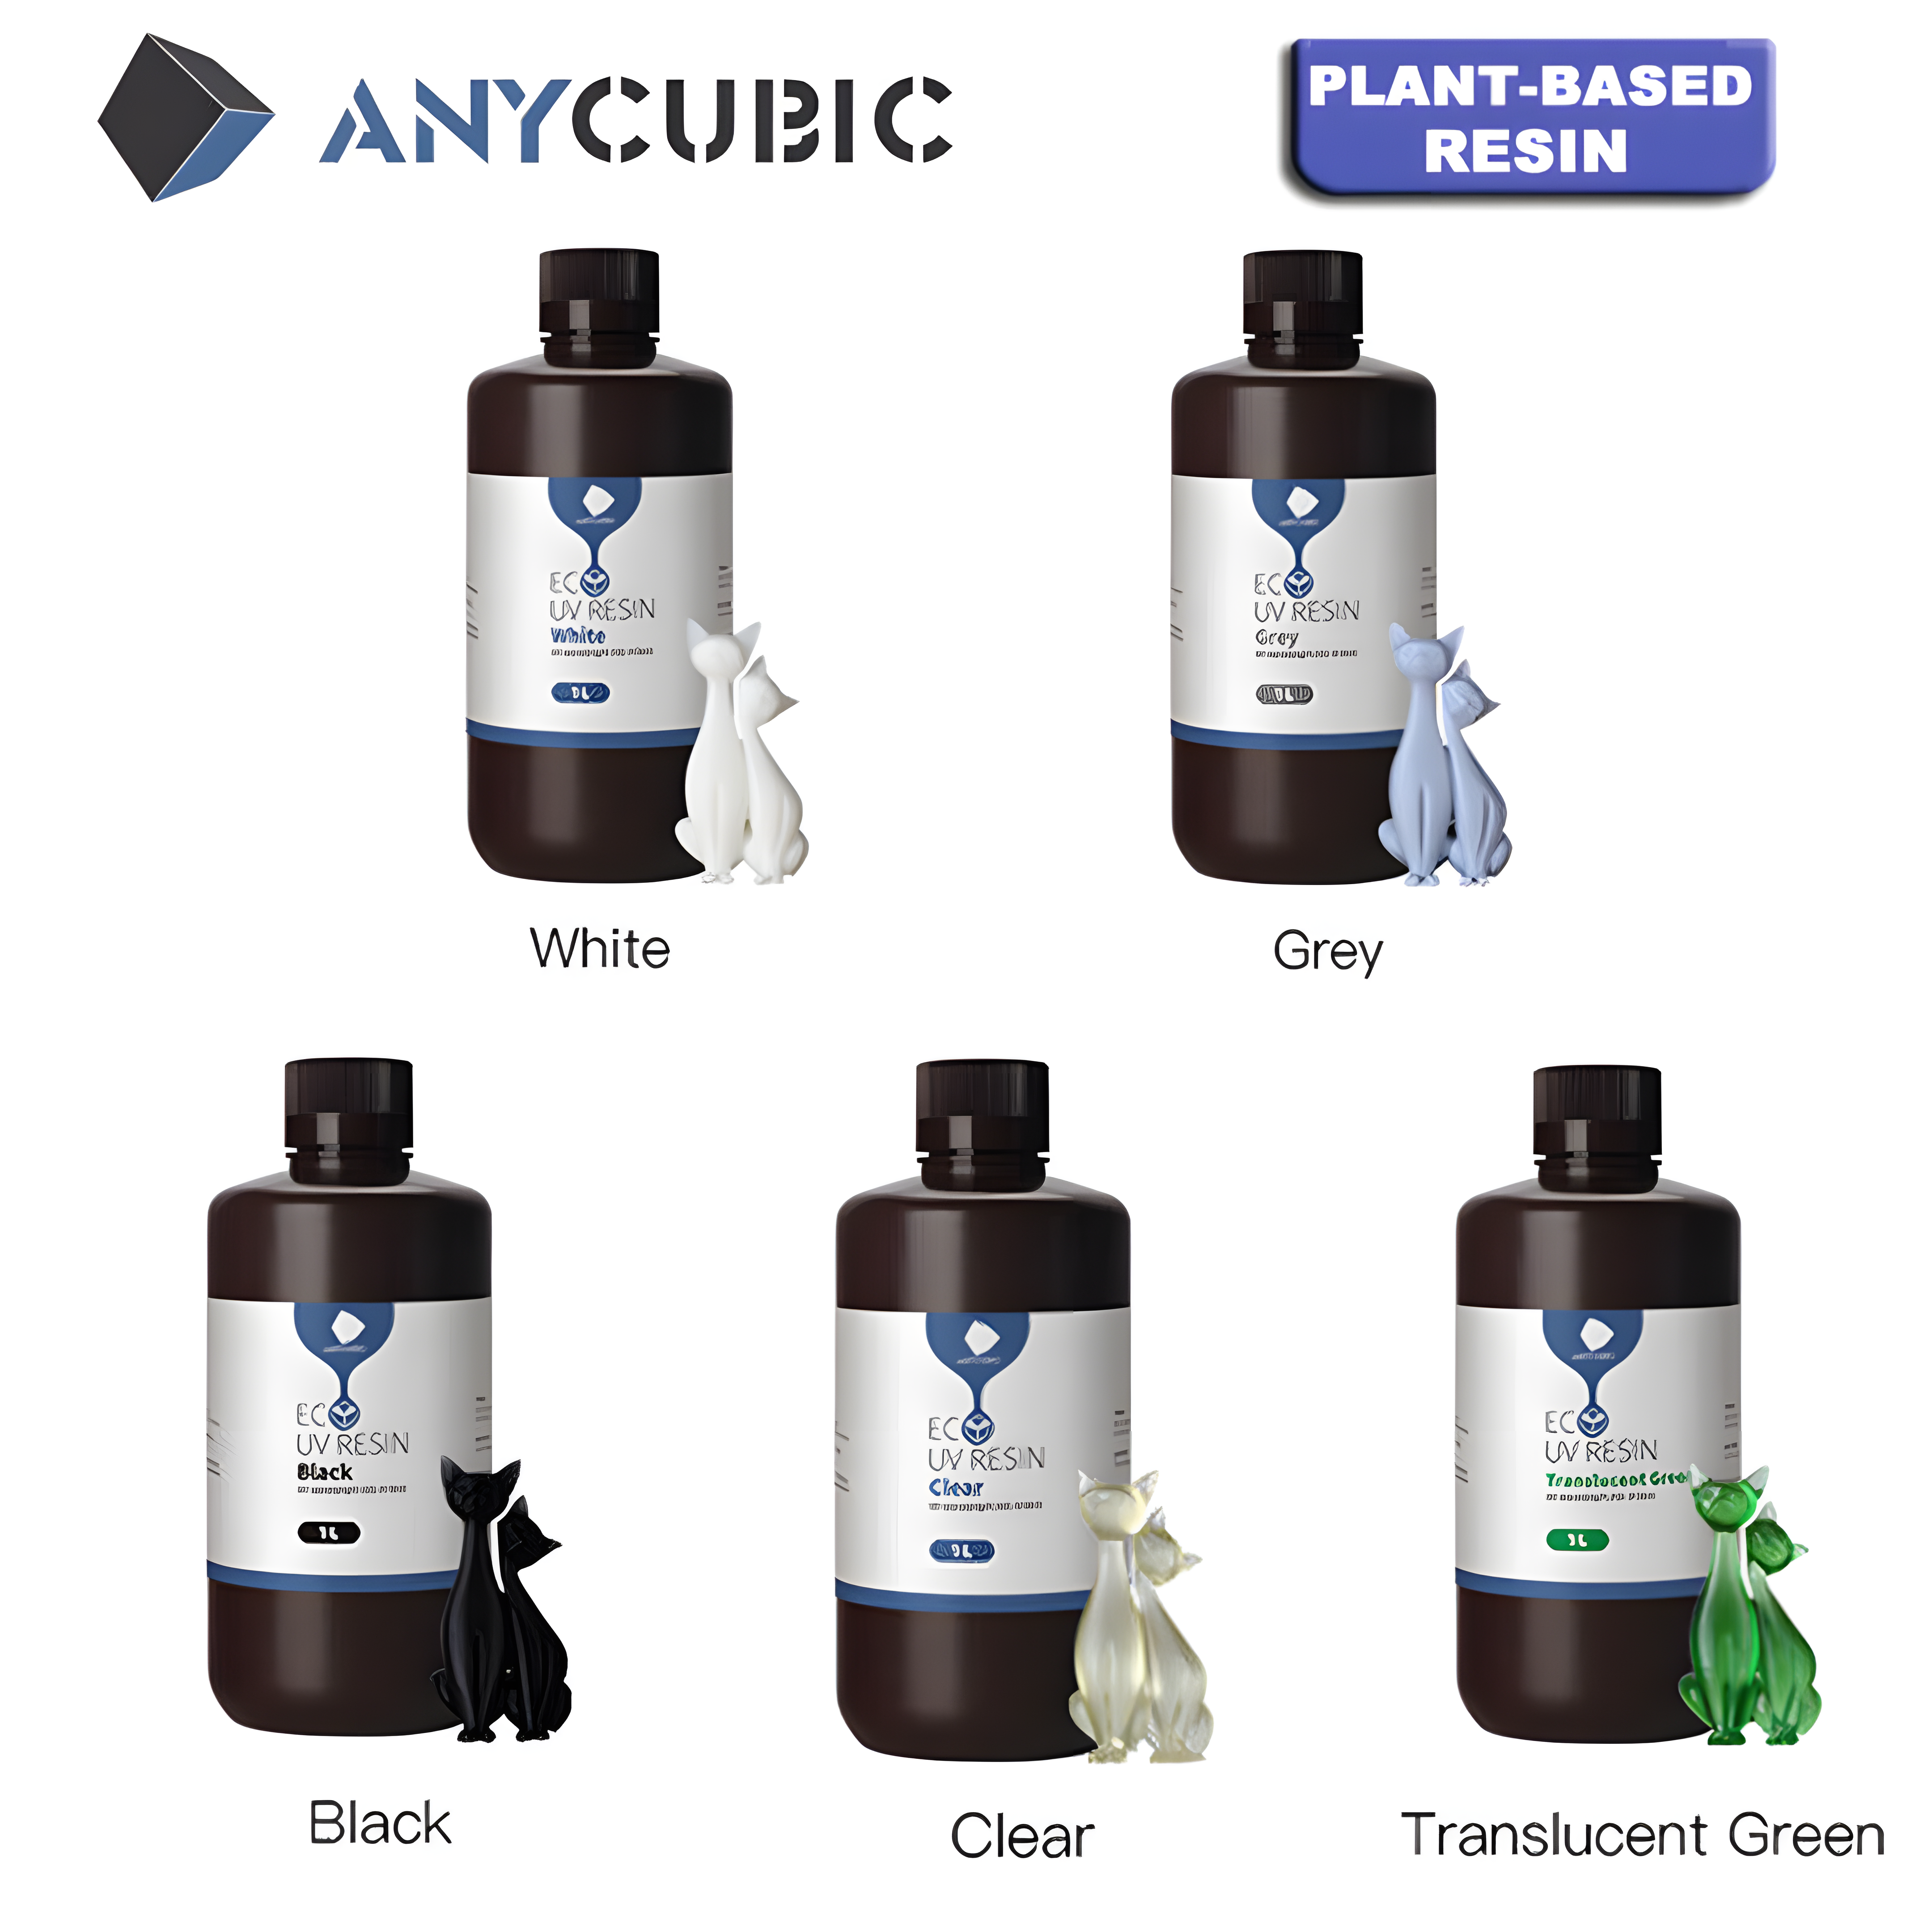  ANYCUBIC 3D Printer Resin, 405nm Plant-Based Rapid Resin, Low  Odor, Photopolymer Resin for LCD 3D Printing, 1kg Black : Industrial &  Scientific